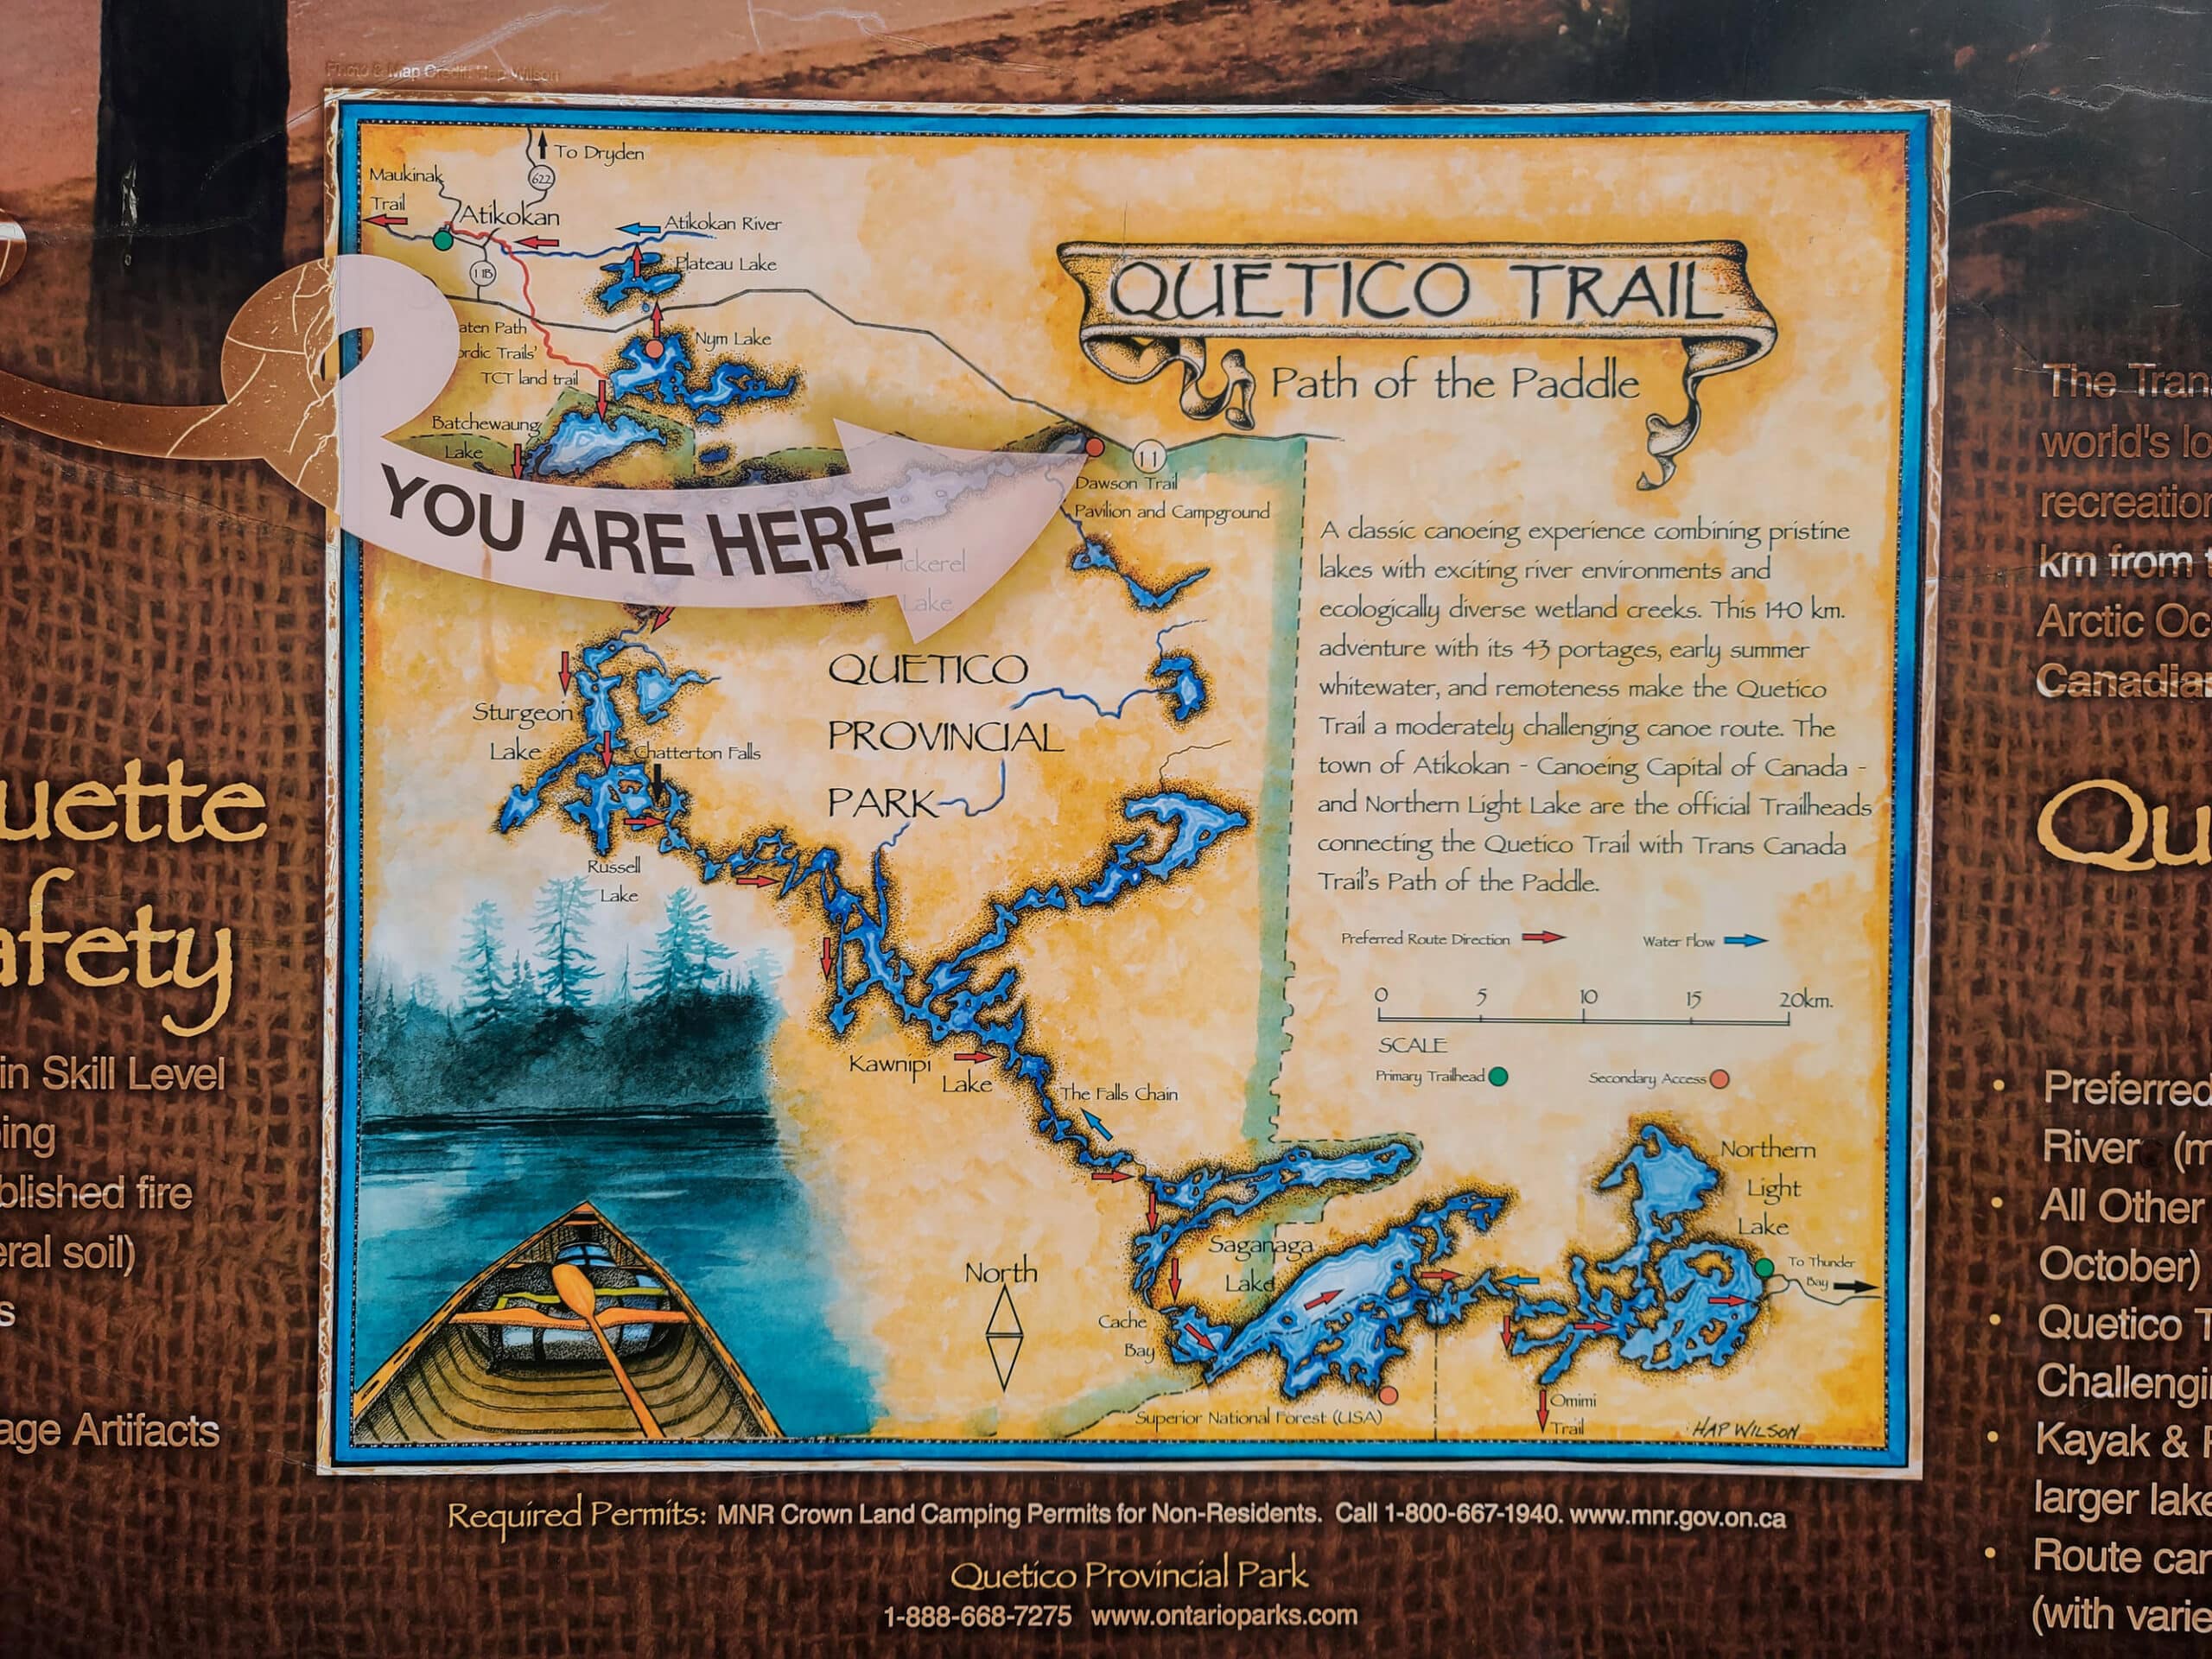 An old timey looking sign for Quetico trail, with a large you are here and lakes indicated.